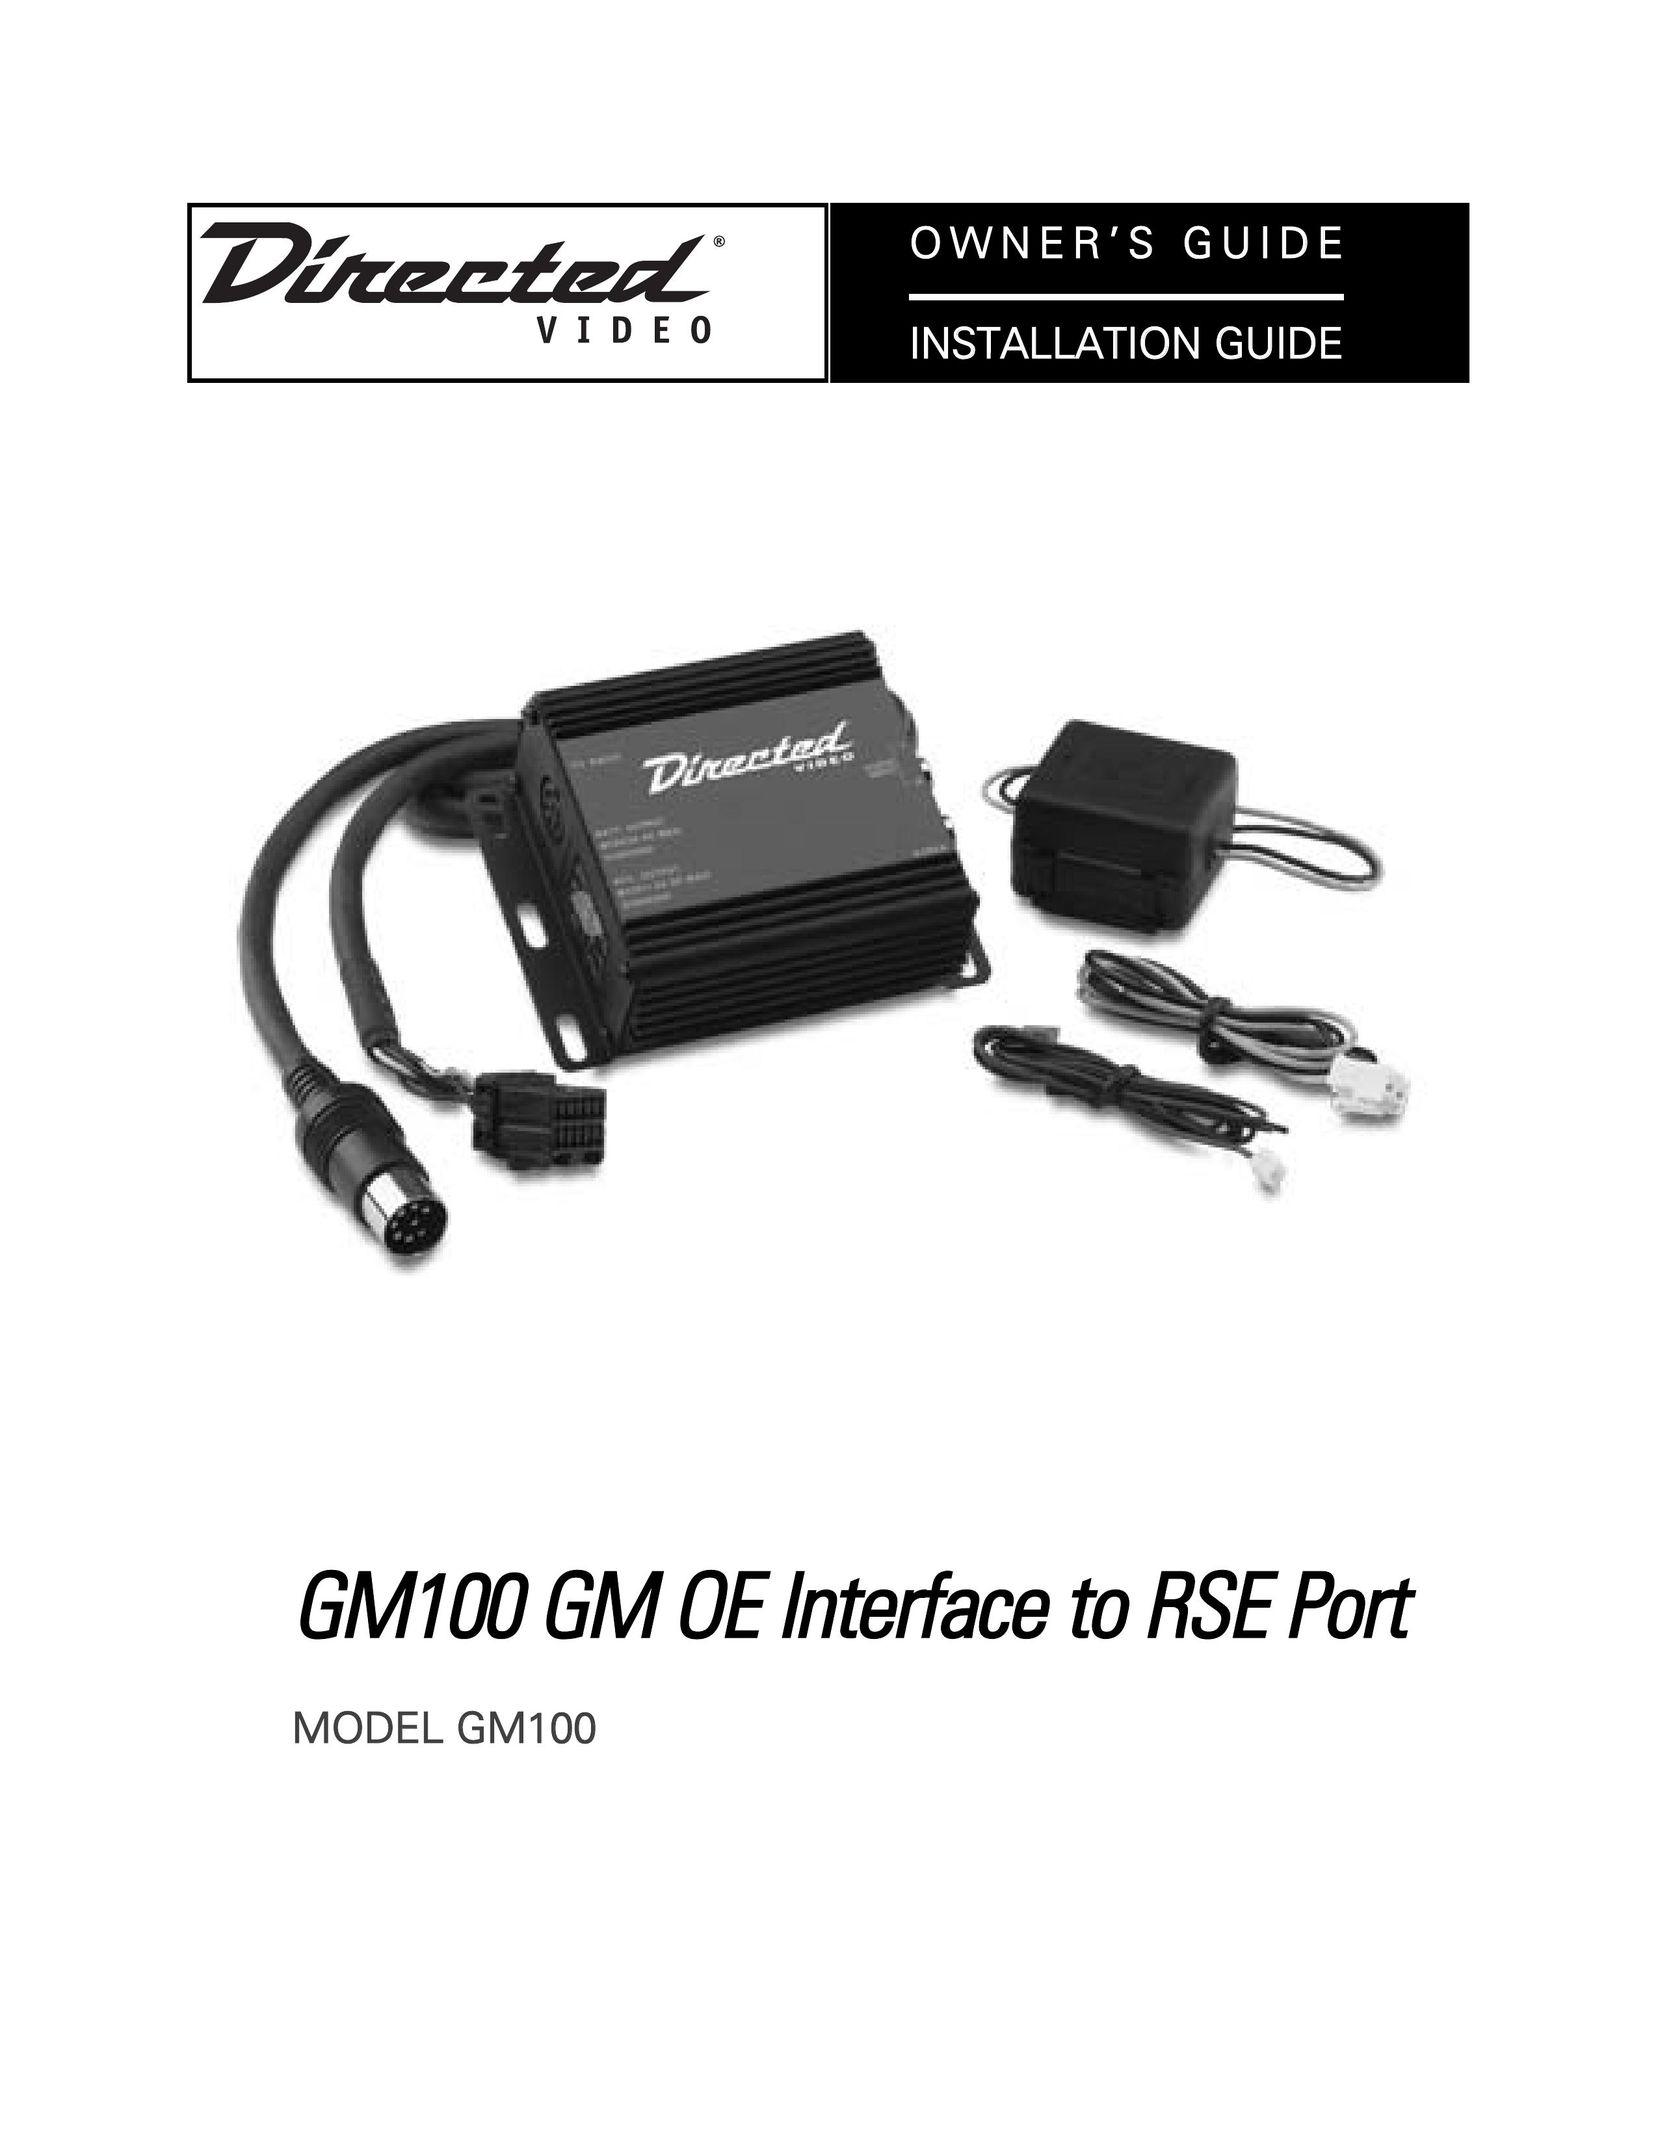 Directed Video GM100 Network Card User Manual